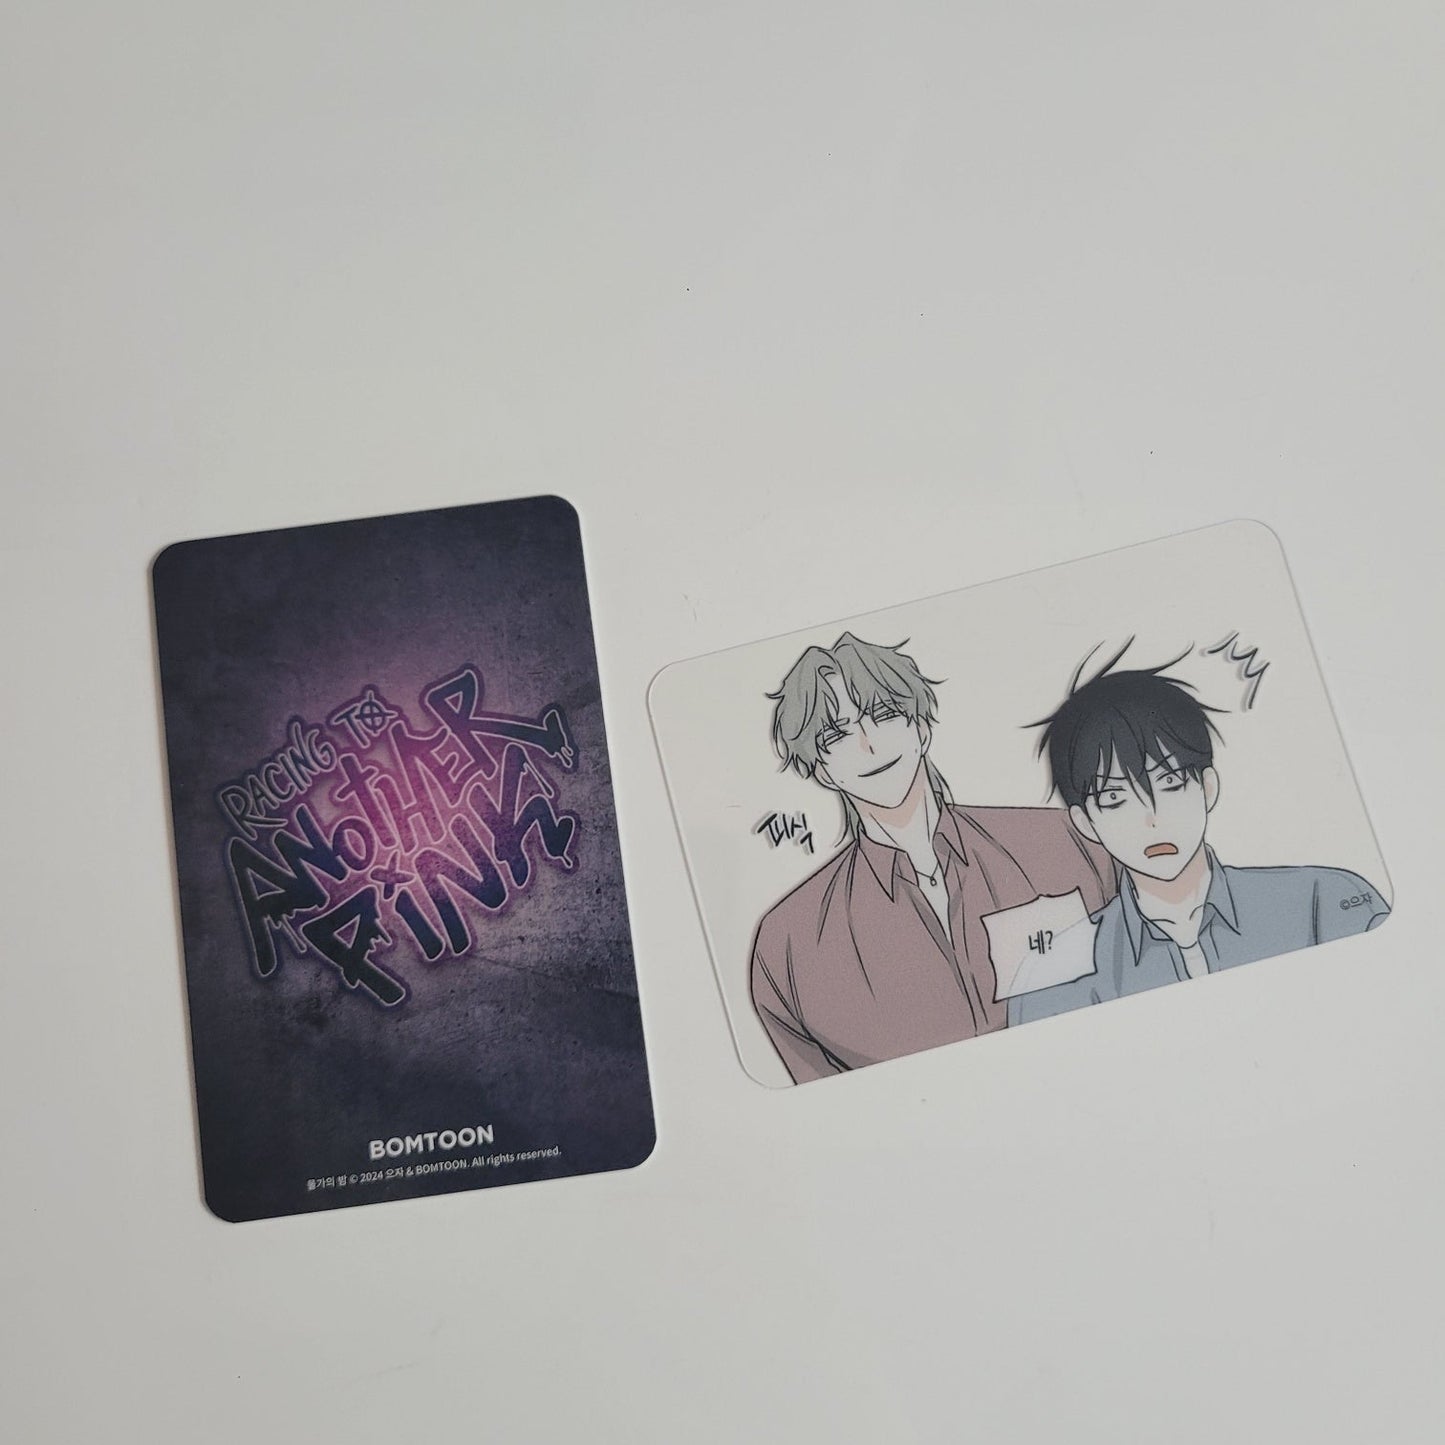 [1 available] Another Pink event photo cards : Low Tide in Twilight